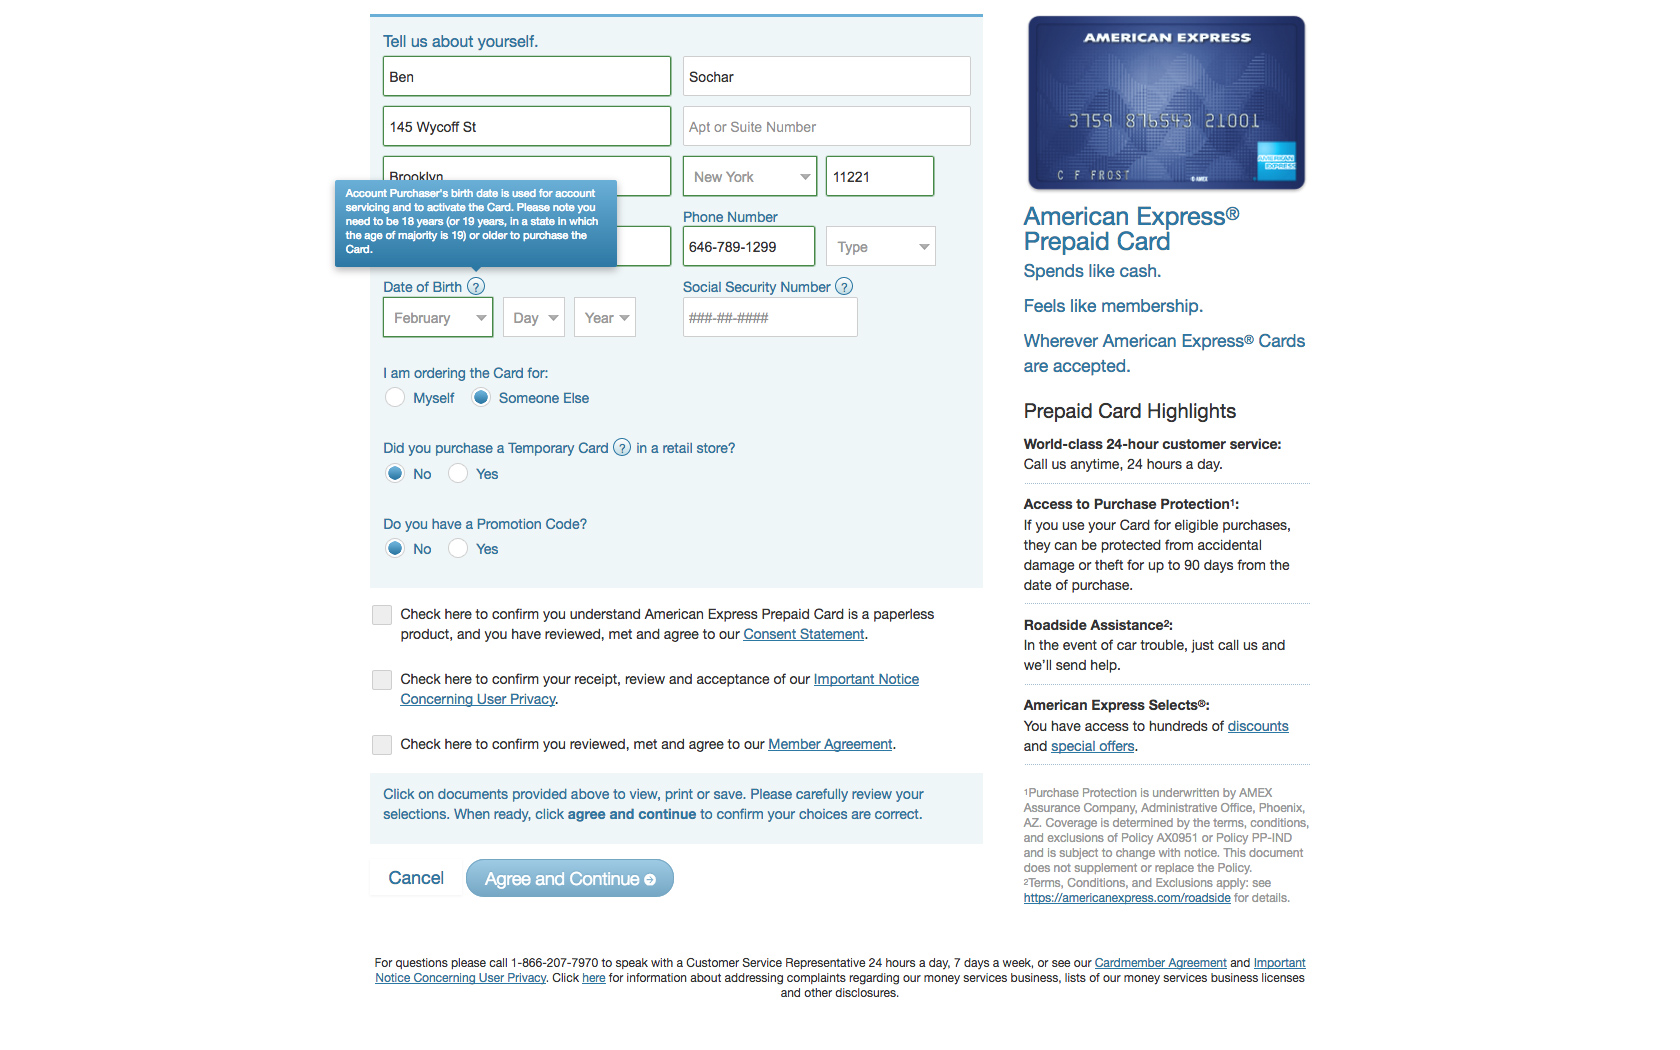 Card order form using automagical formatting and client side verification